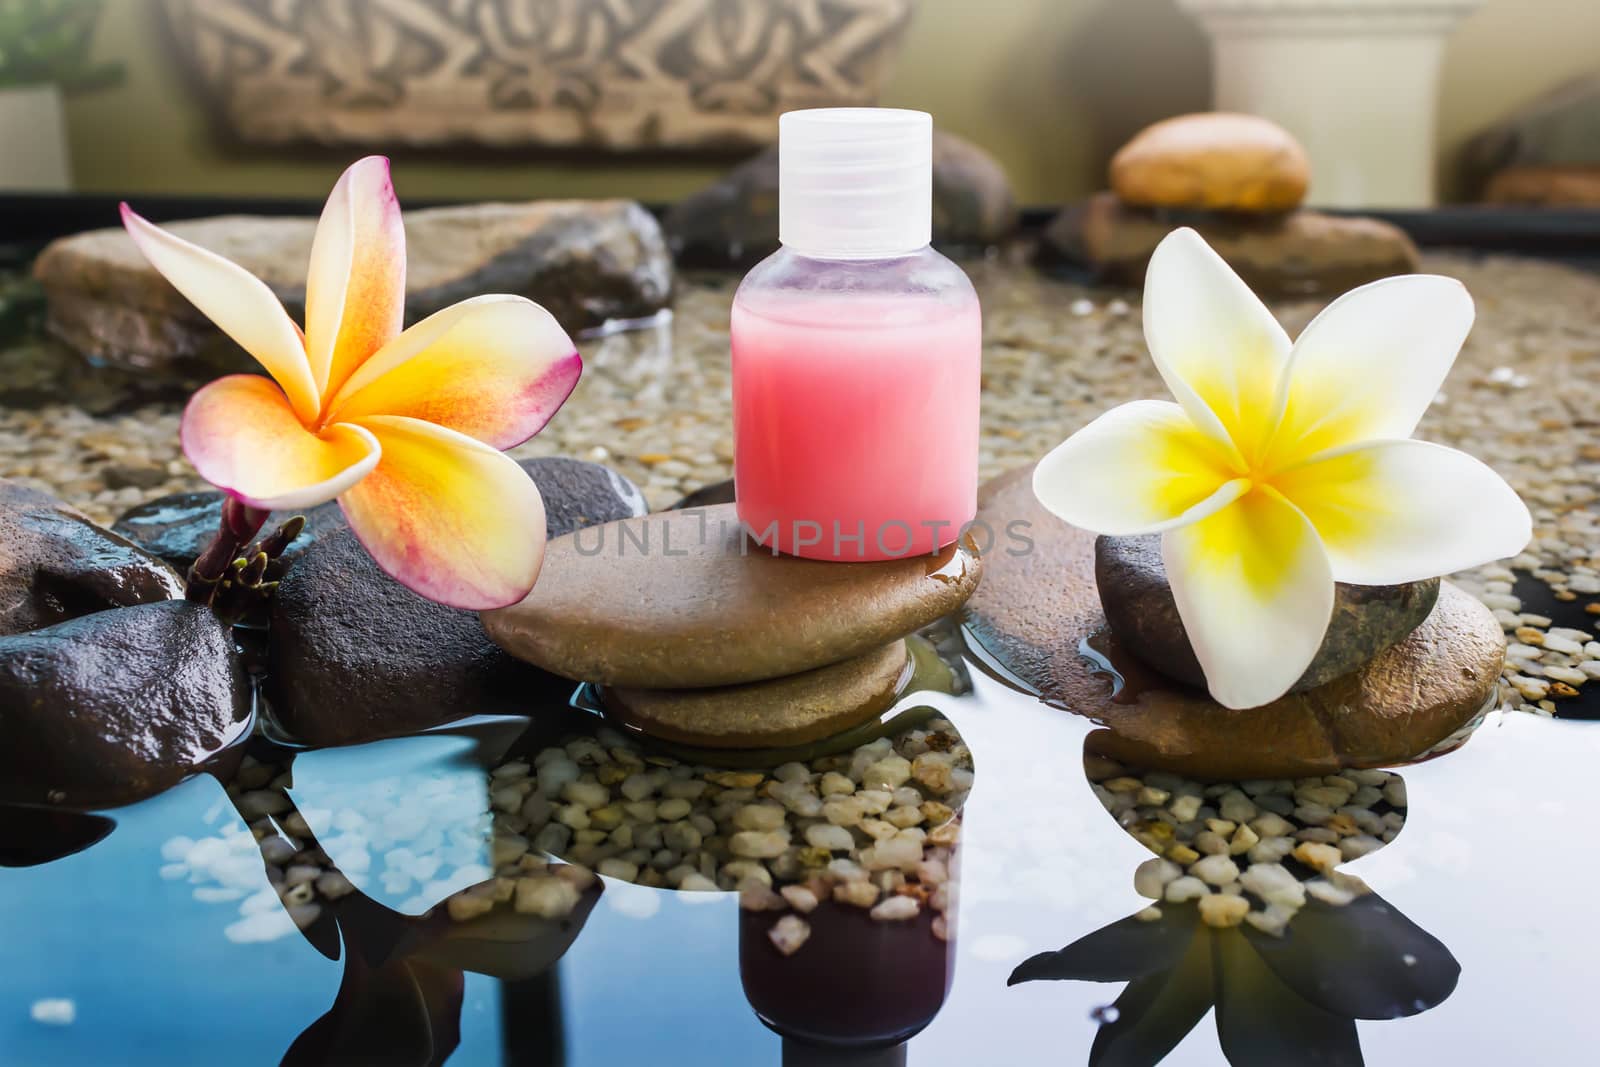 Mini set of bubble bath and shower gel decorated in zen style with pebble rock and flower with relaxing mood